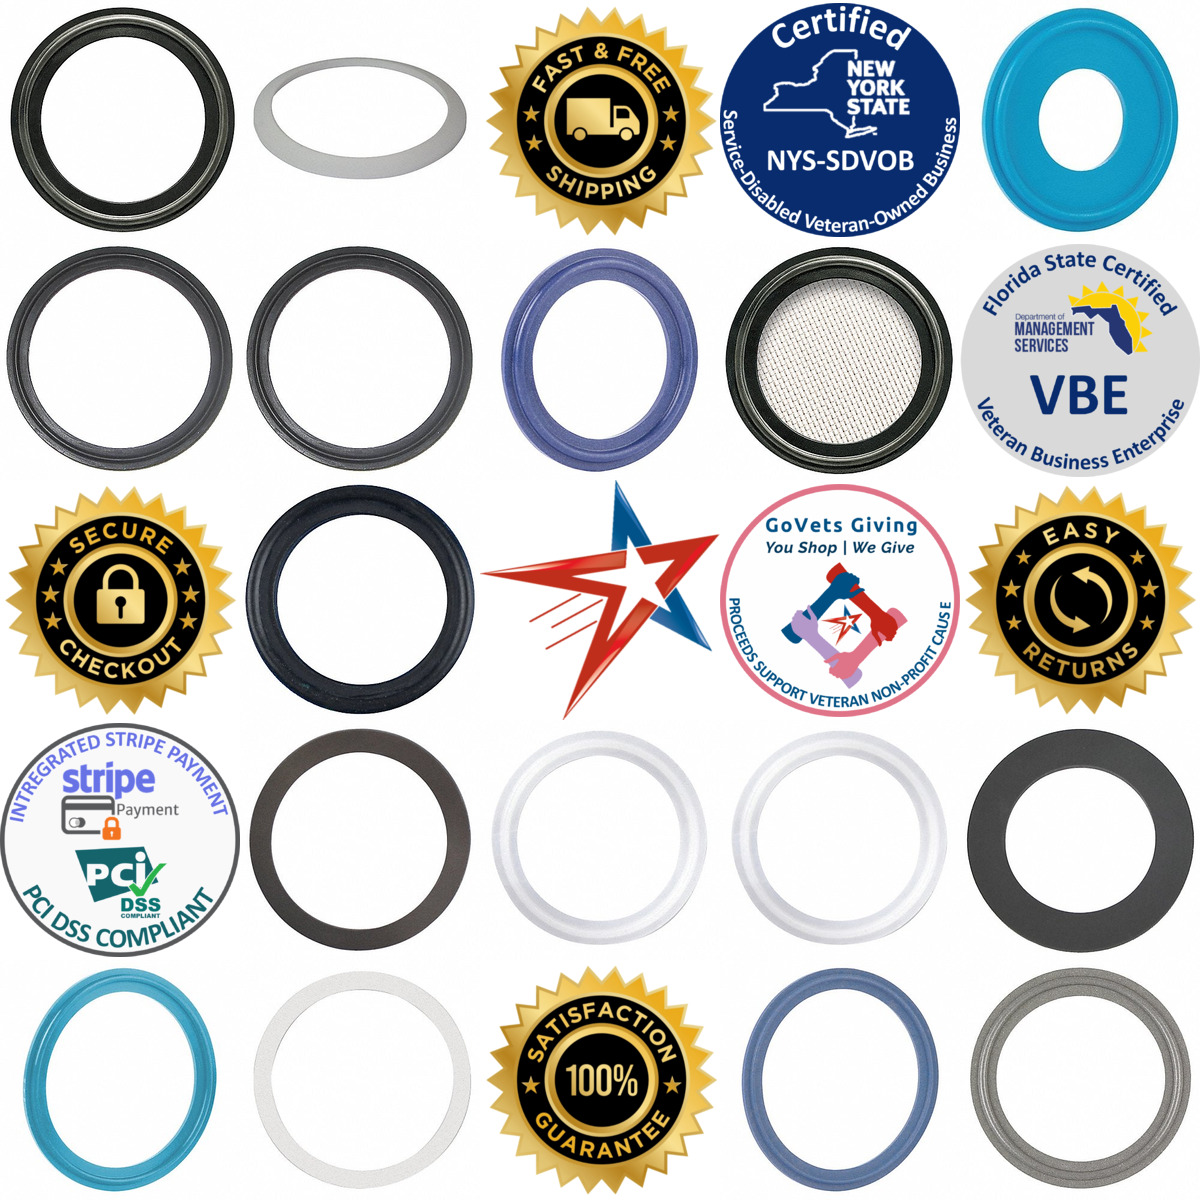 A selection of Sanitary Gaskets products on GoVets